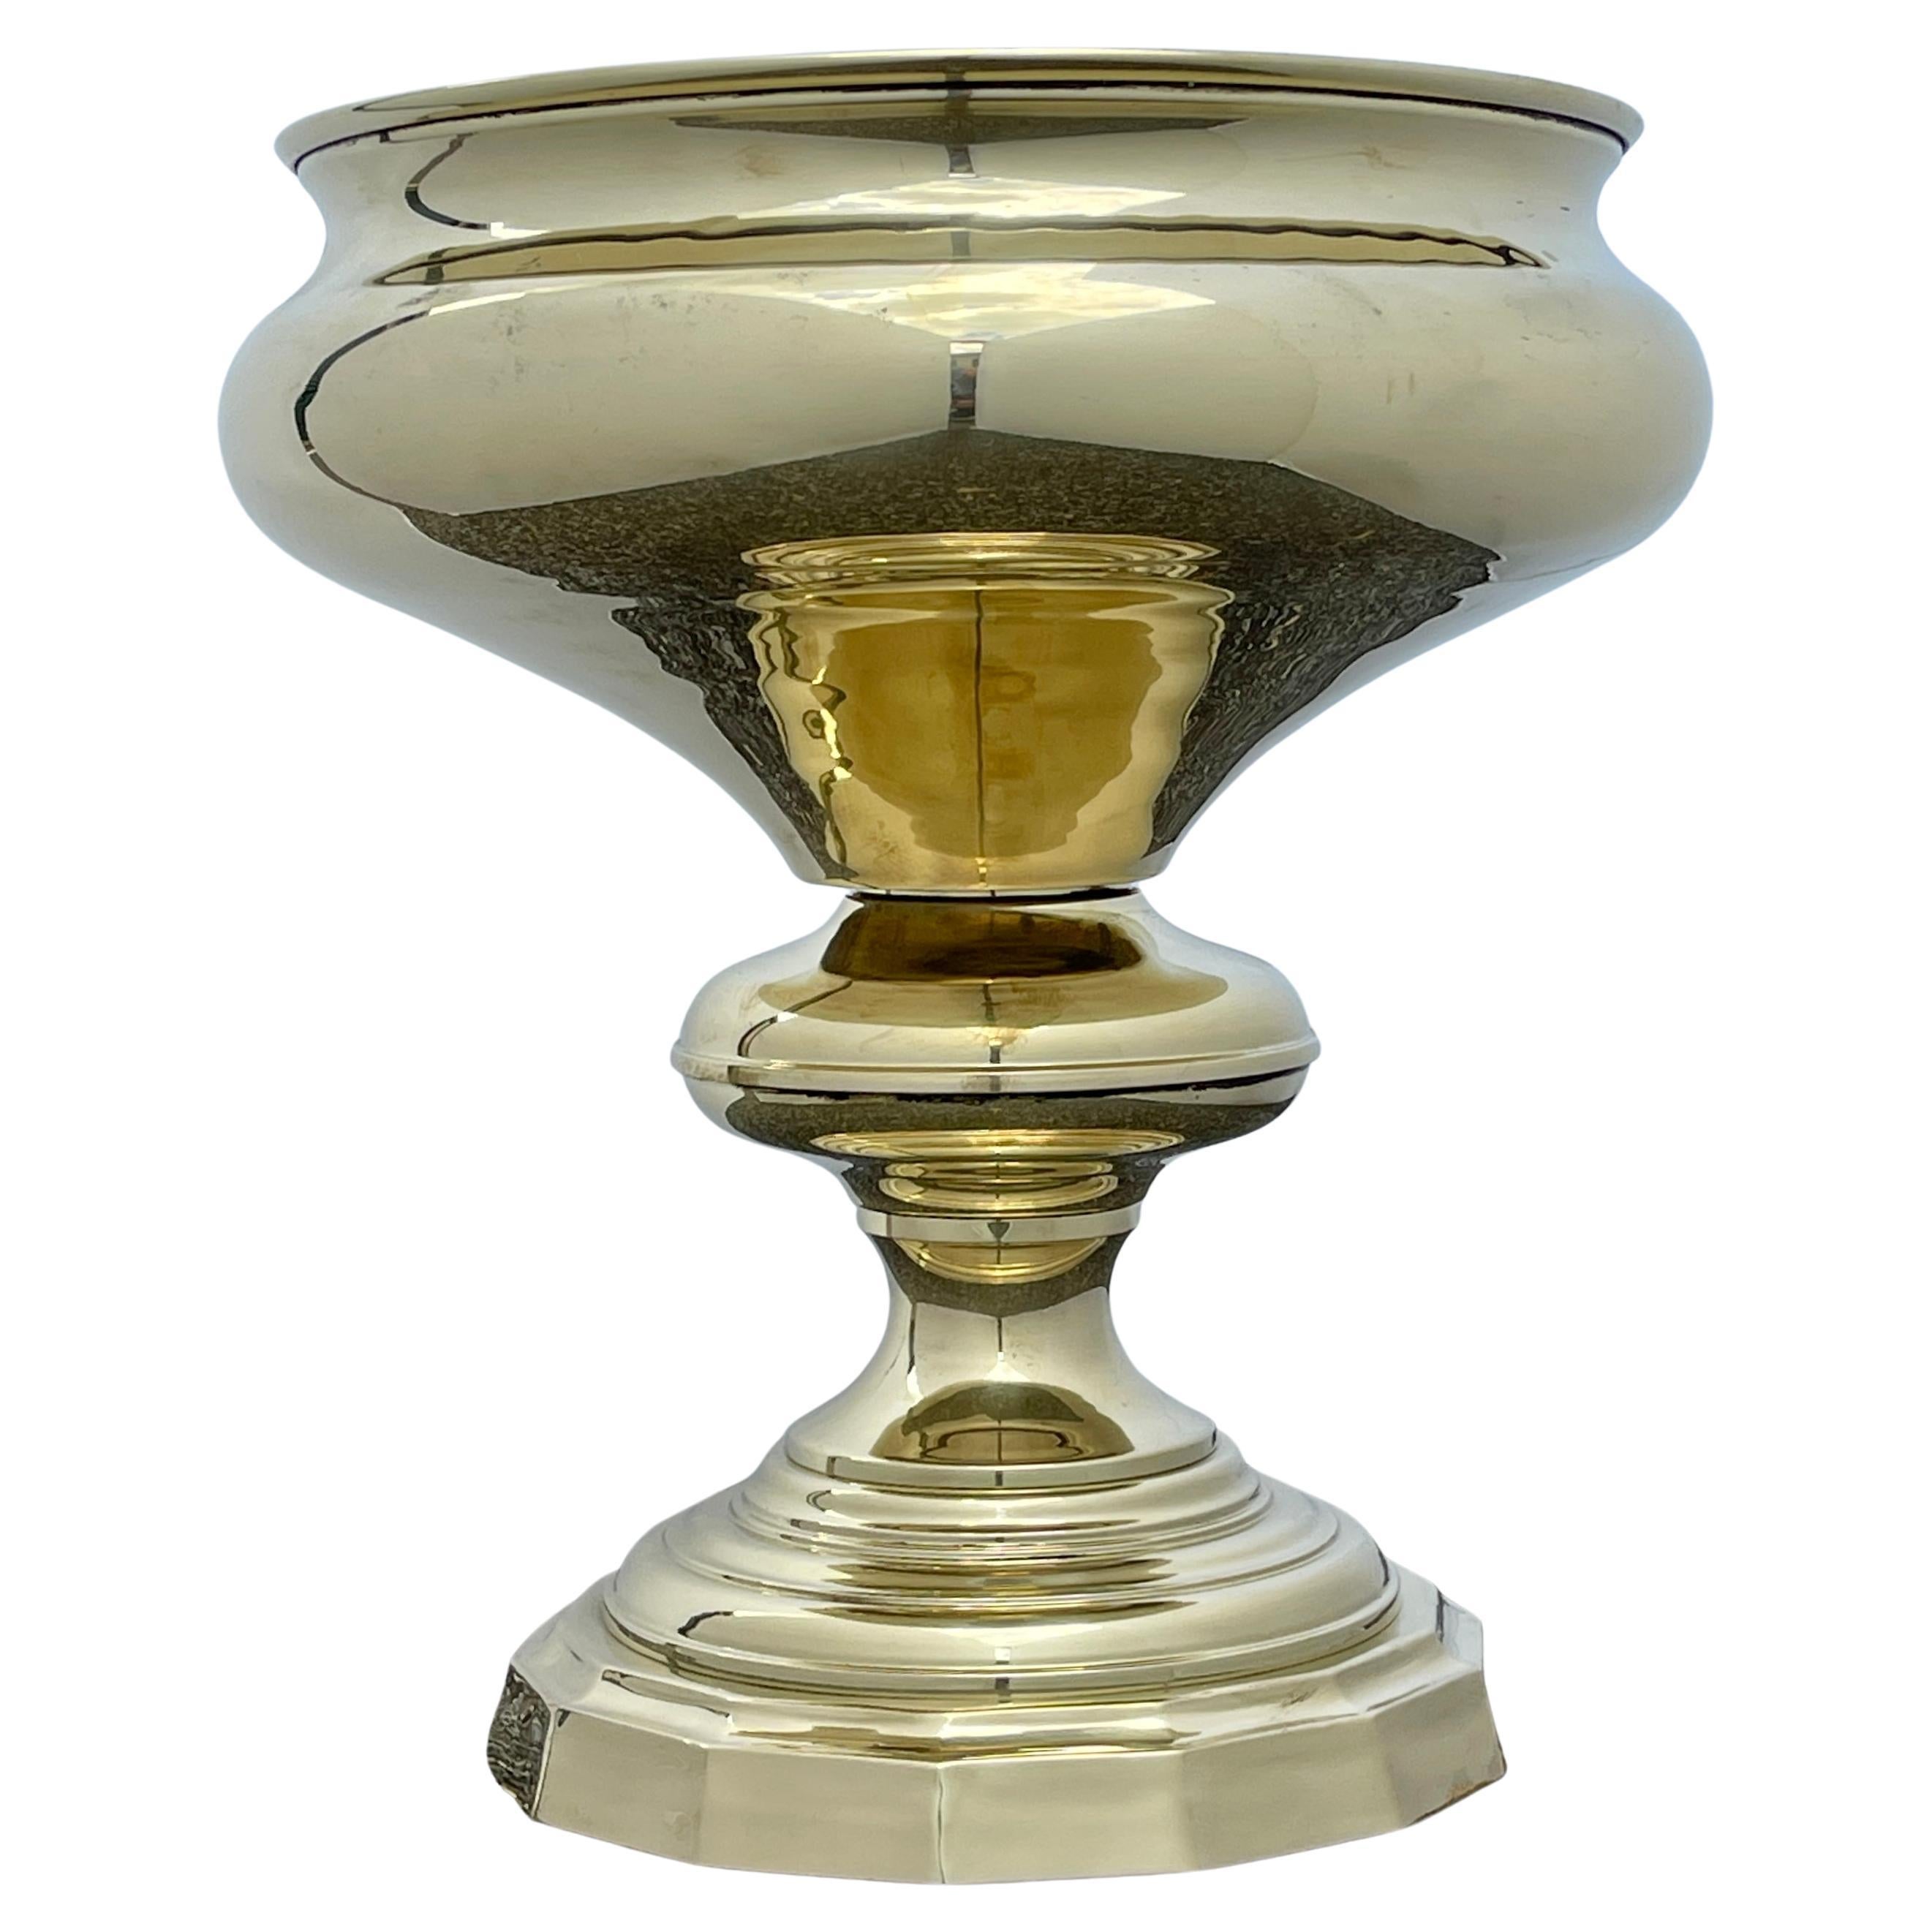 Large Oversized Polished Brass Metal Pot Planter midcentury Spain. 

Complemented with clean lines, this multifunctional jardiniere offers a refined modern look to a corner in need of an upgrade or can be used a centerpiece on a large table. The